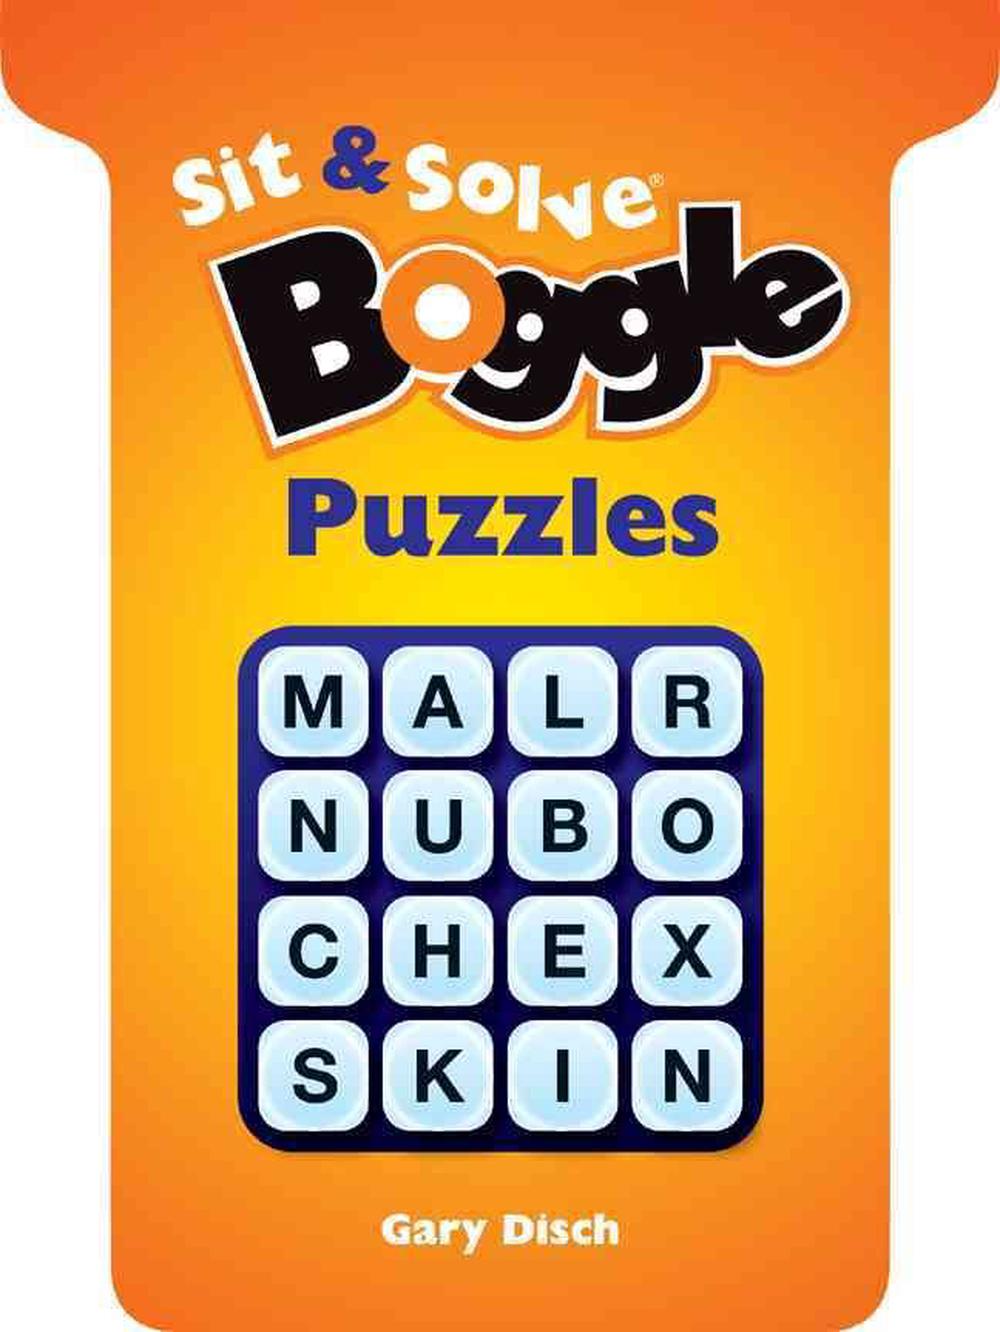 boggle-puzzles-new-edition-by-gary-disch-english-paperback-book-free-shipping-9781402780172